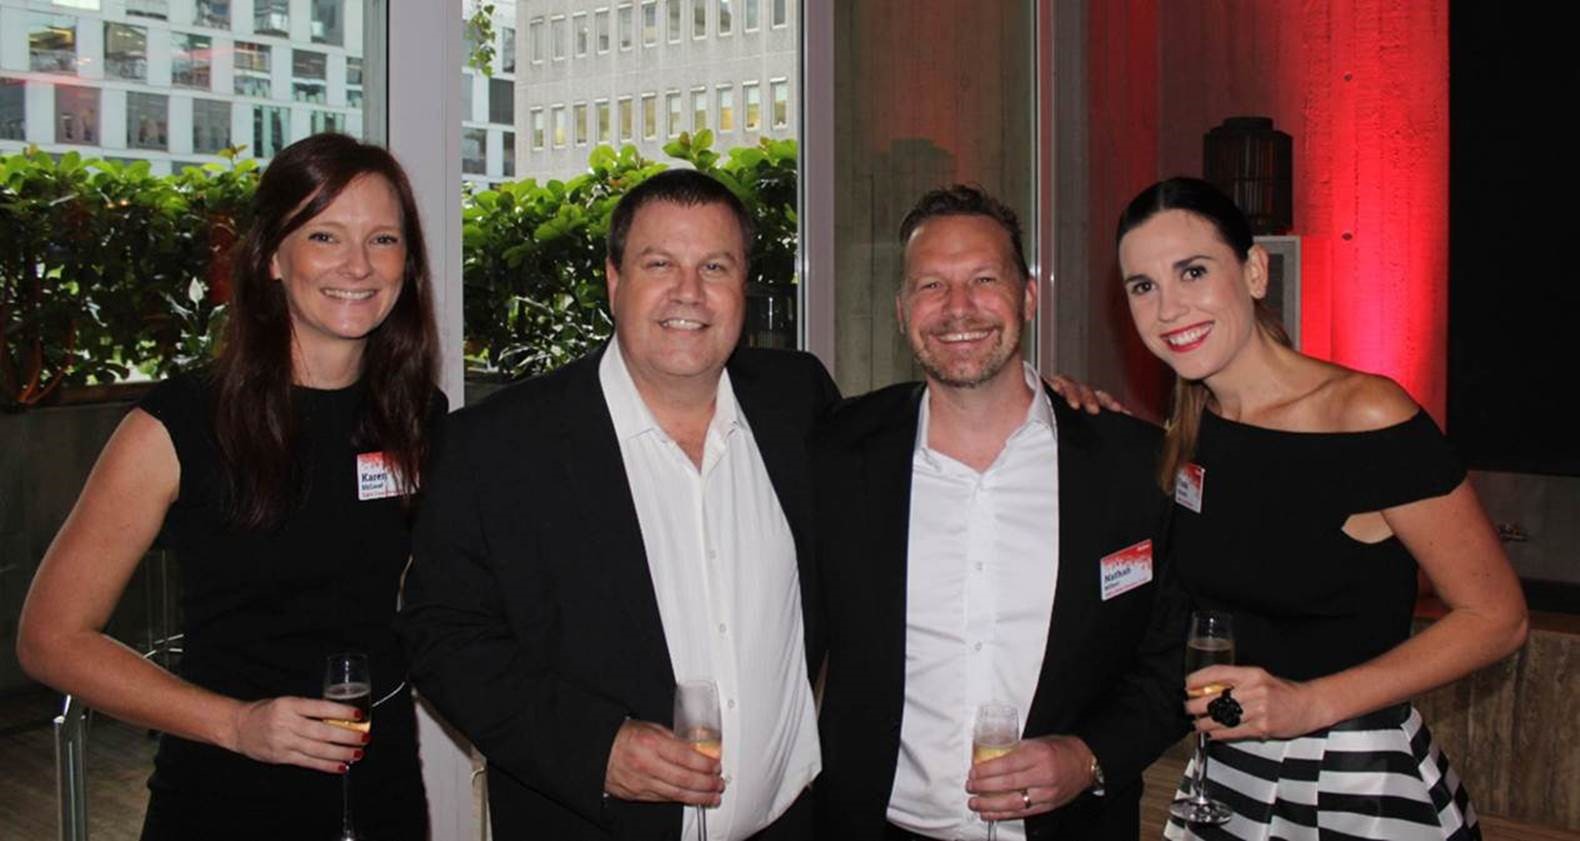 Sabre staff and friends in the travel industry gathered together to welcome in the 2016 Christmas season.